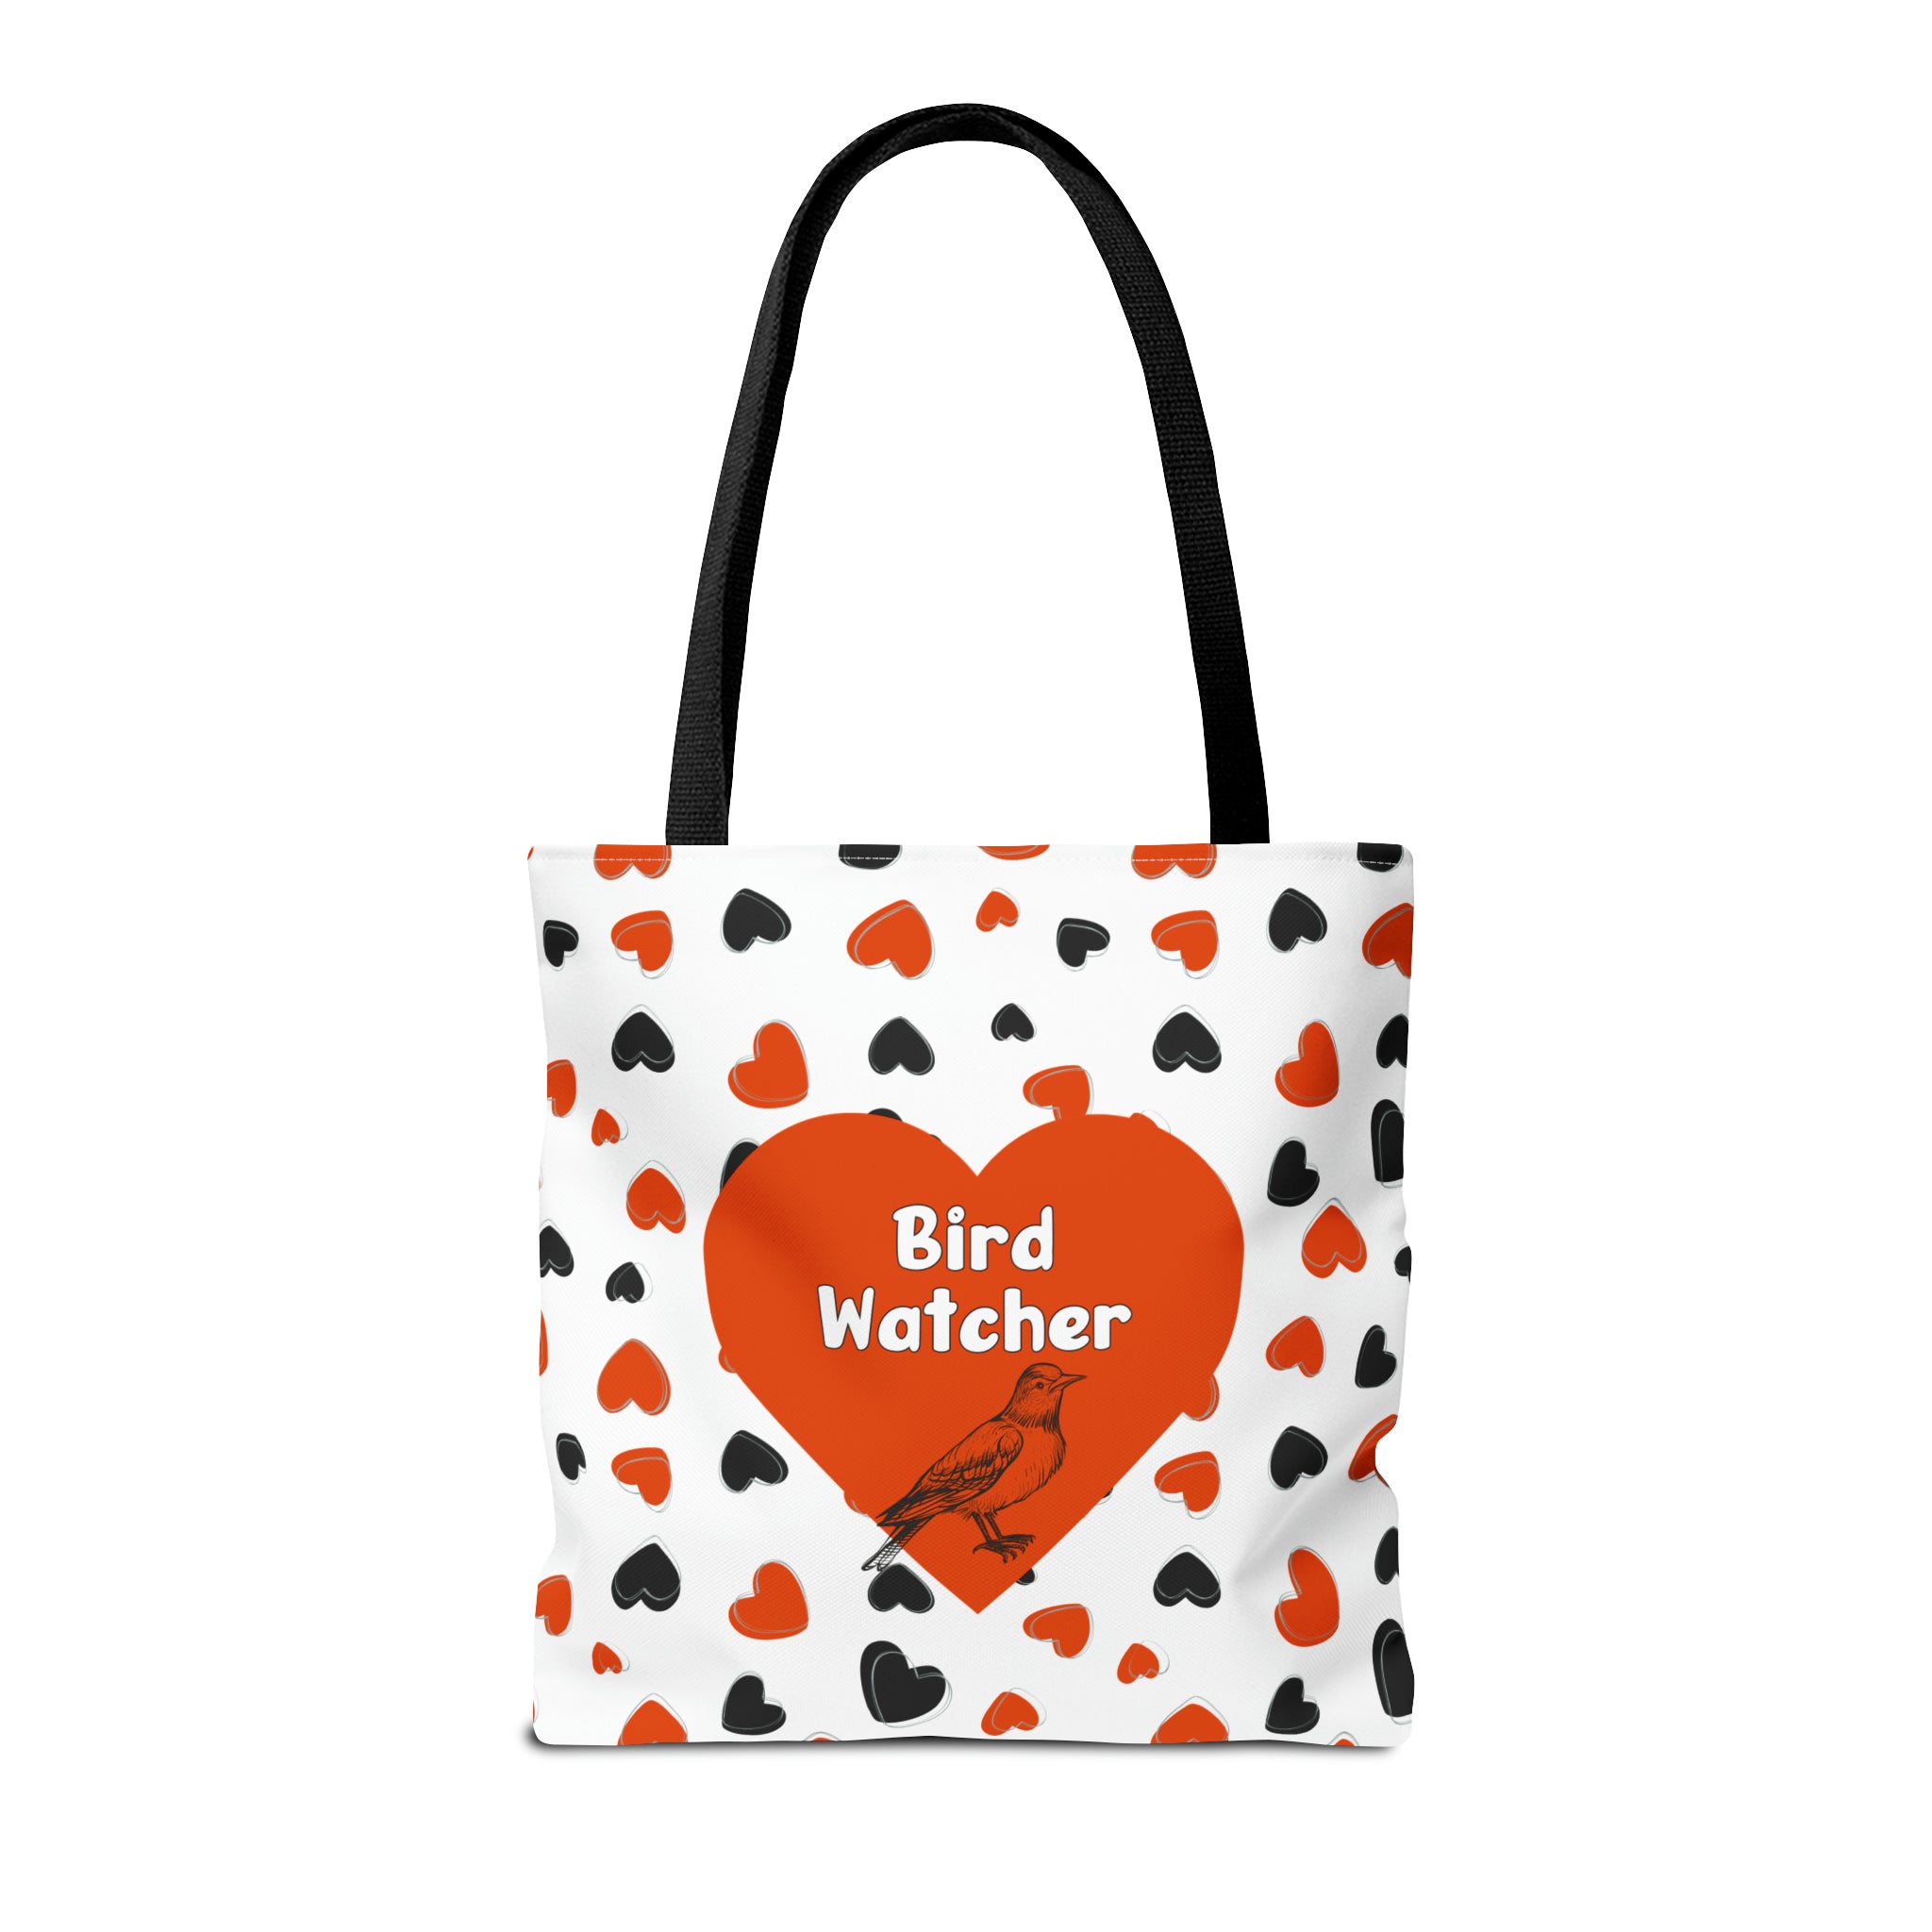 Bird Watcher Bag Heart Theme | Shopping Tote for Baltimore Sports Fans | Baltimore Valentine Gift